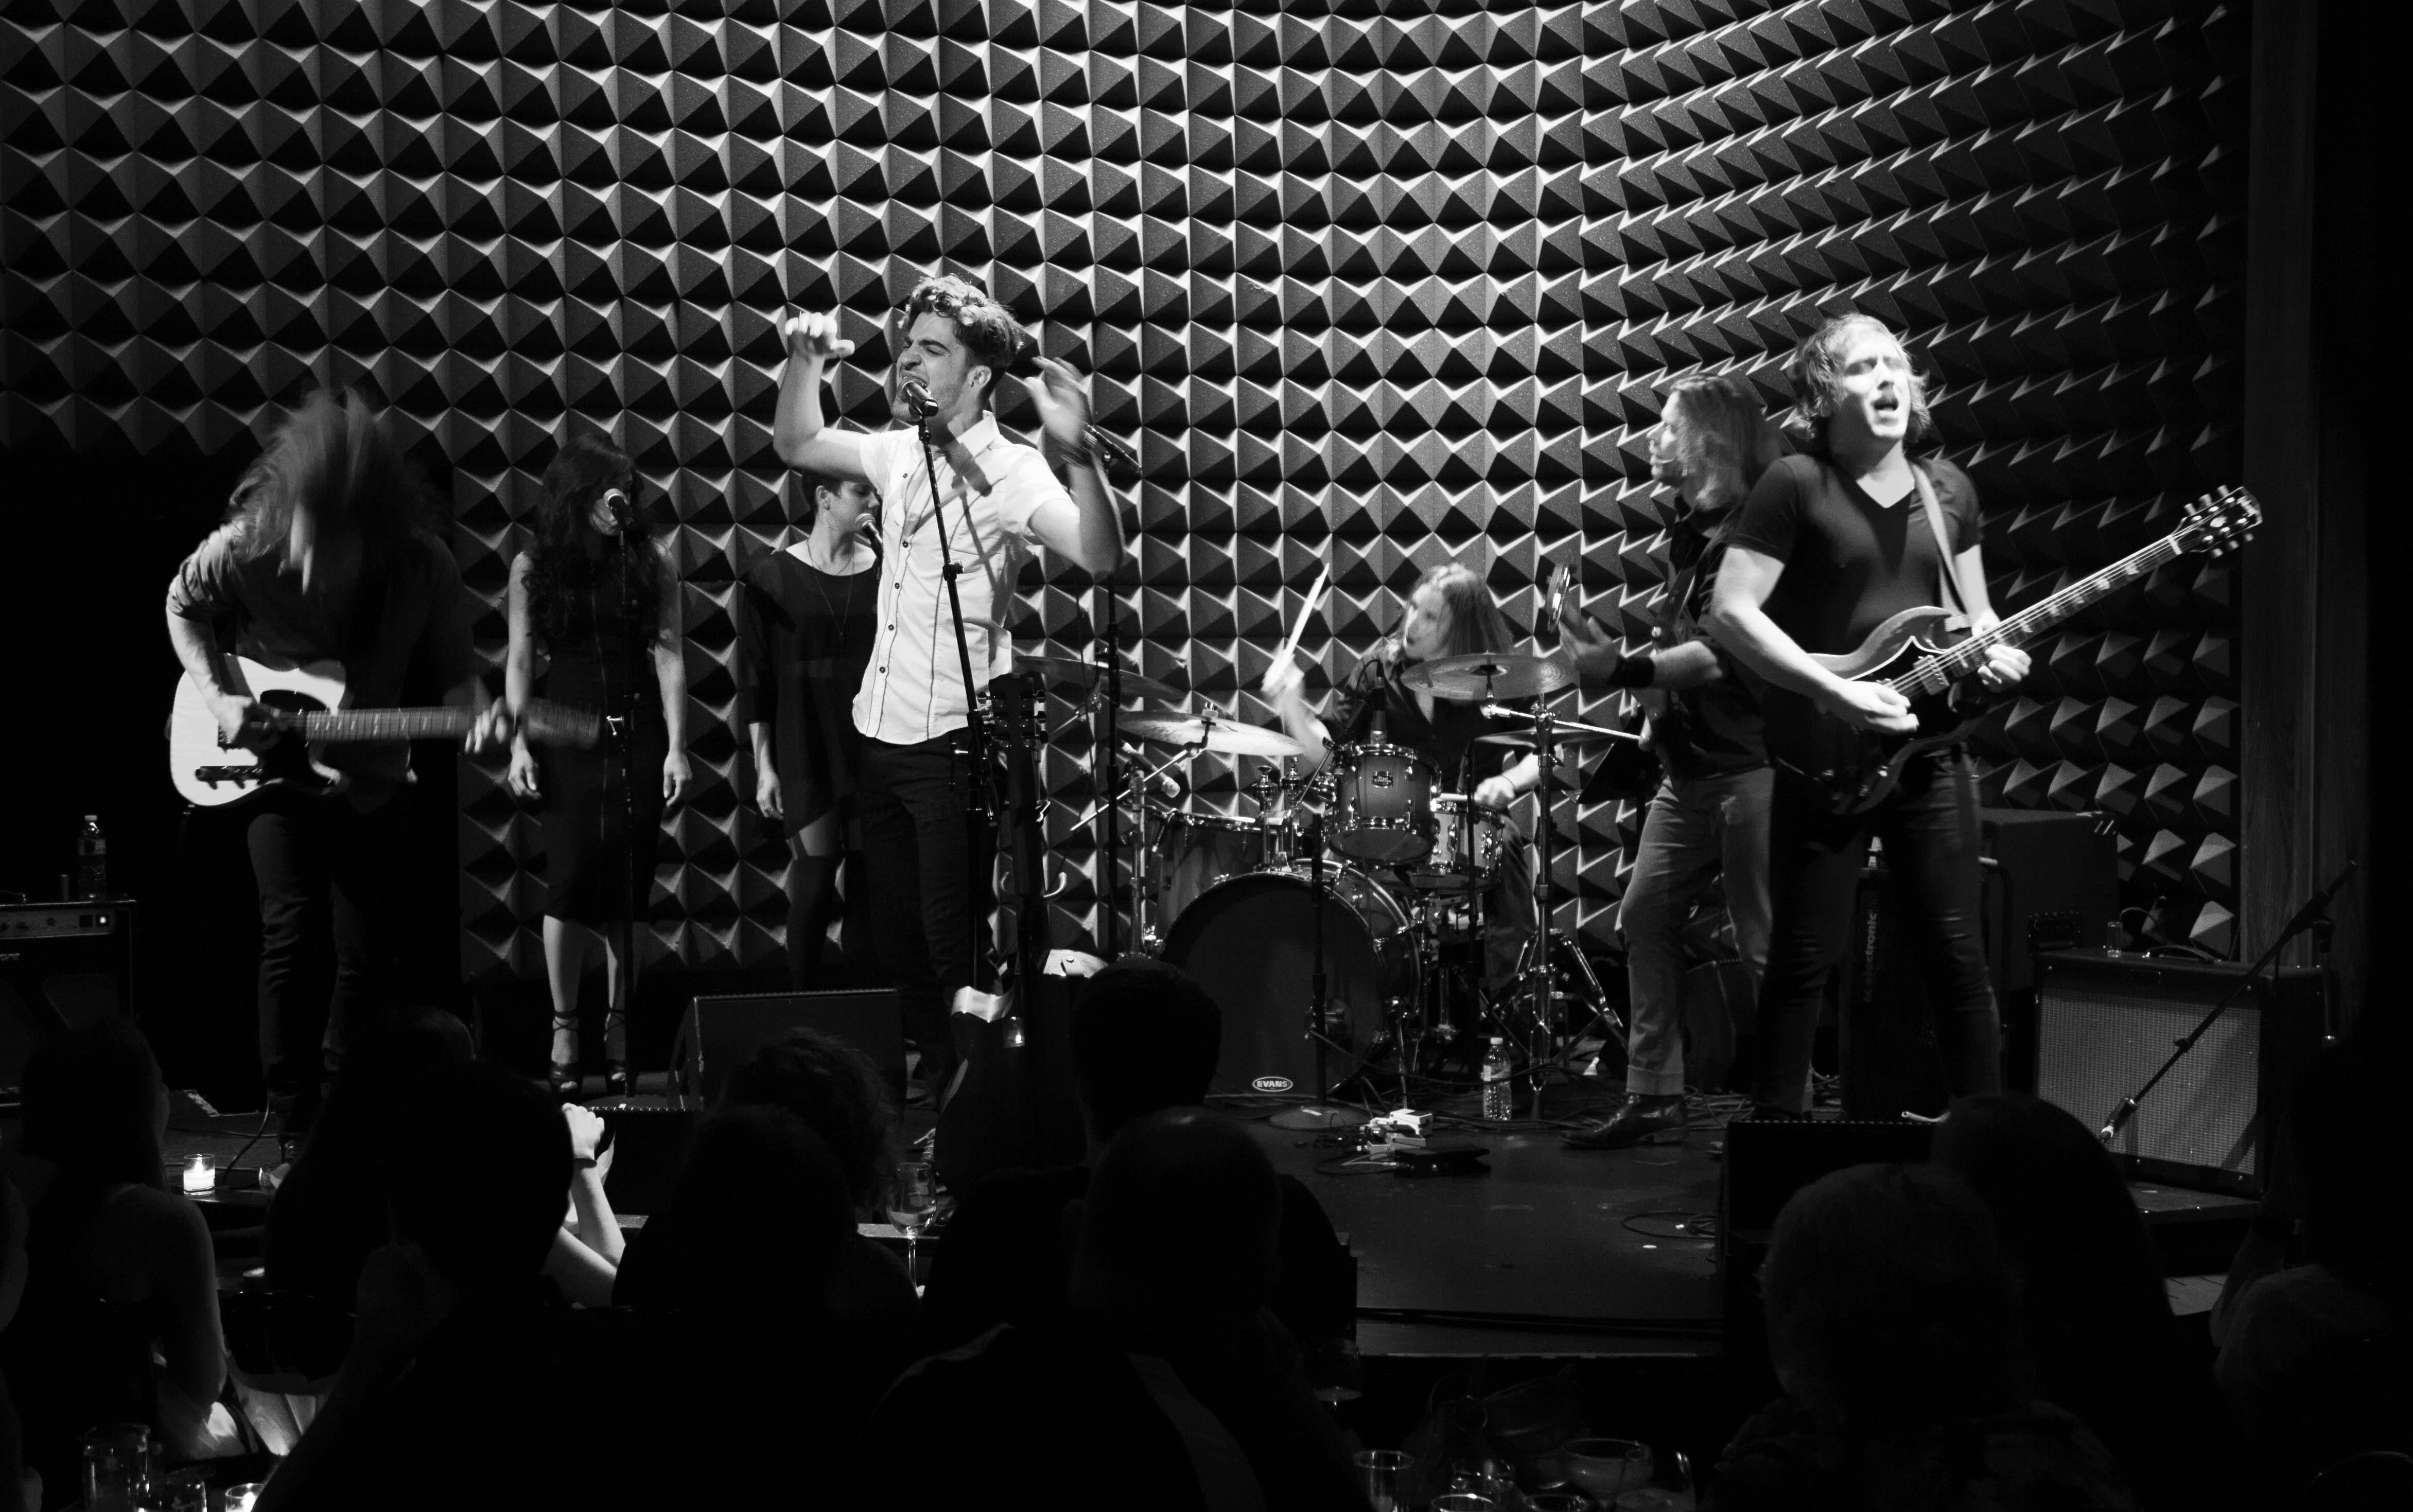 LIVE EP Release July 24, 2014 at Joe's Pub NYC